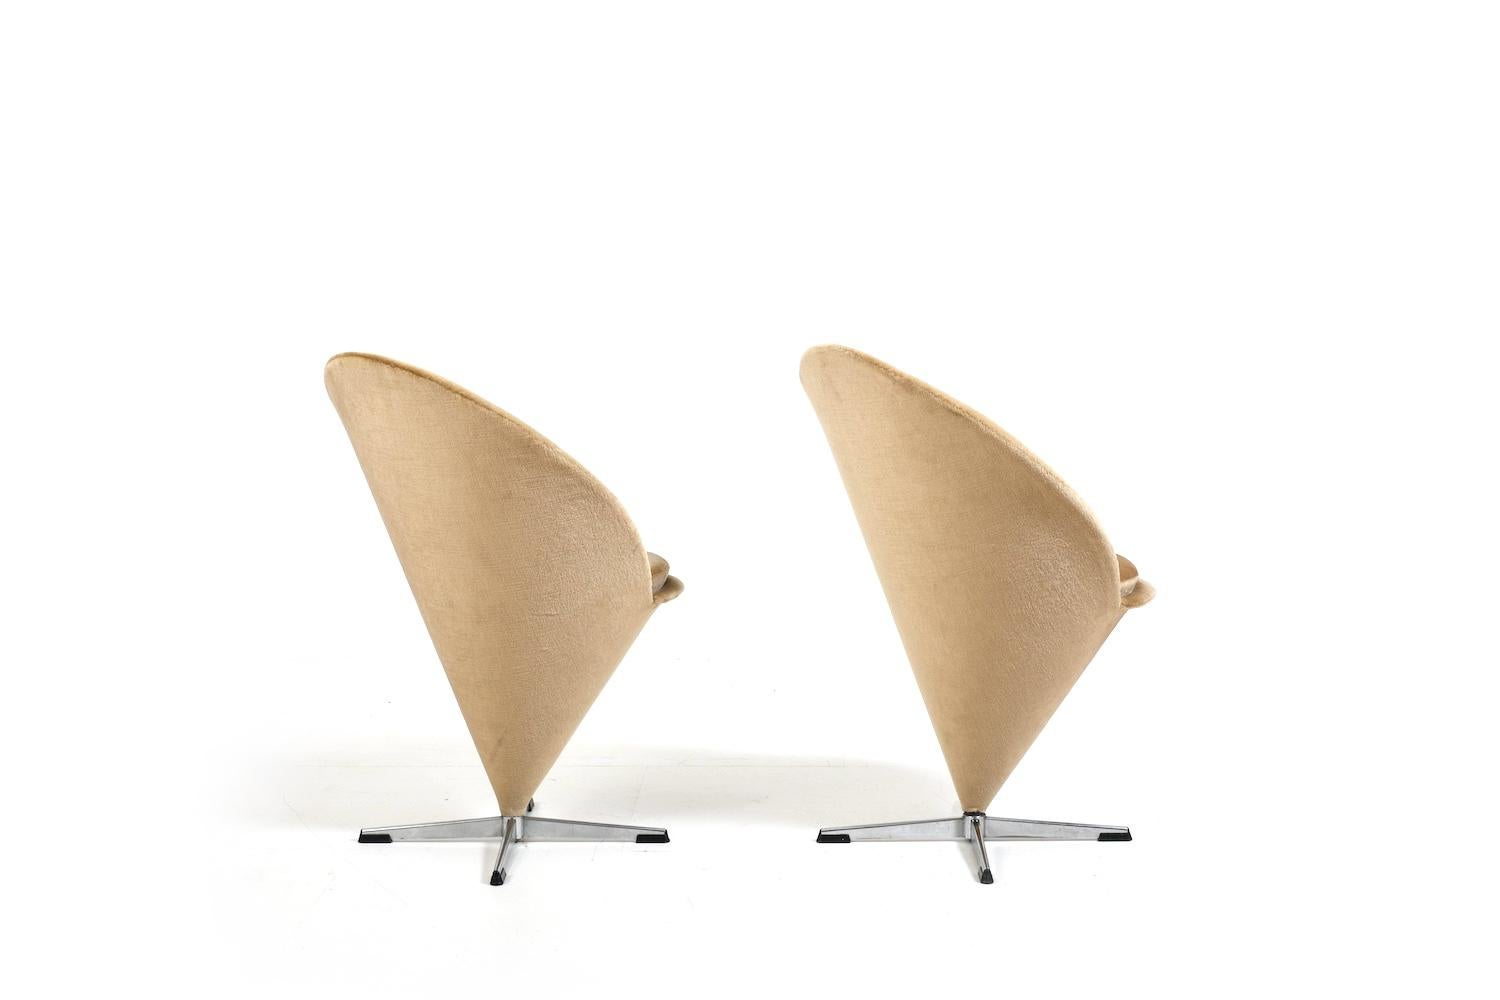 Late 20th Century Pair of 1970s Verner Panton Cone Chairs by Plus Linje